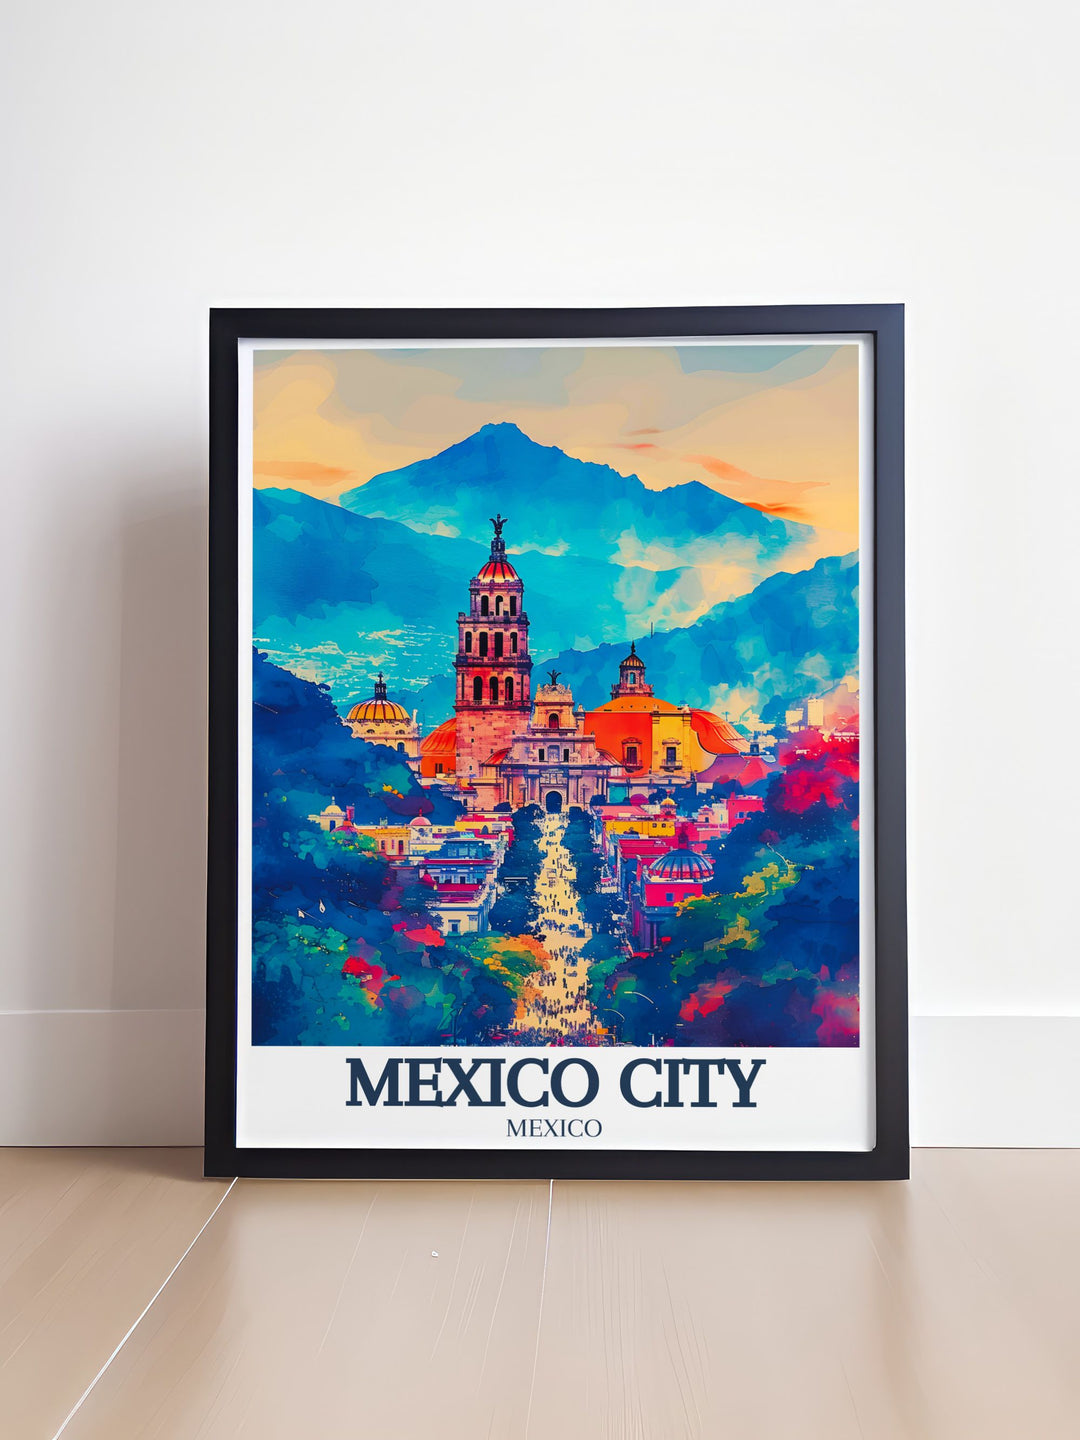 Beautiful Mexico City wall art showcasing Metropolitan cathedral Zocalo Chapultepec castle. This detailed print highlights the architectural splendor and cultural significance of these iconic landmarks making it an ideal addition to any space.